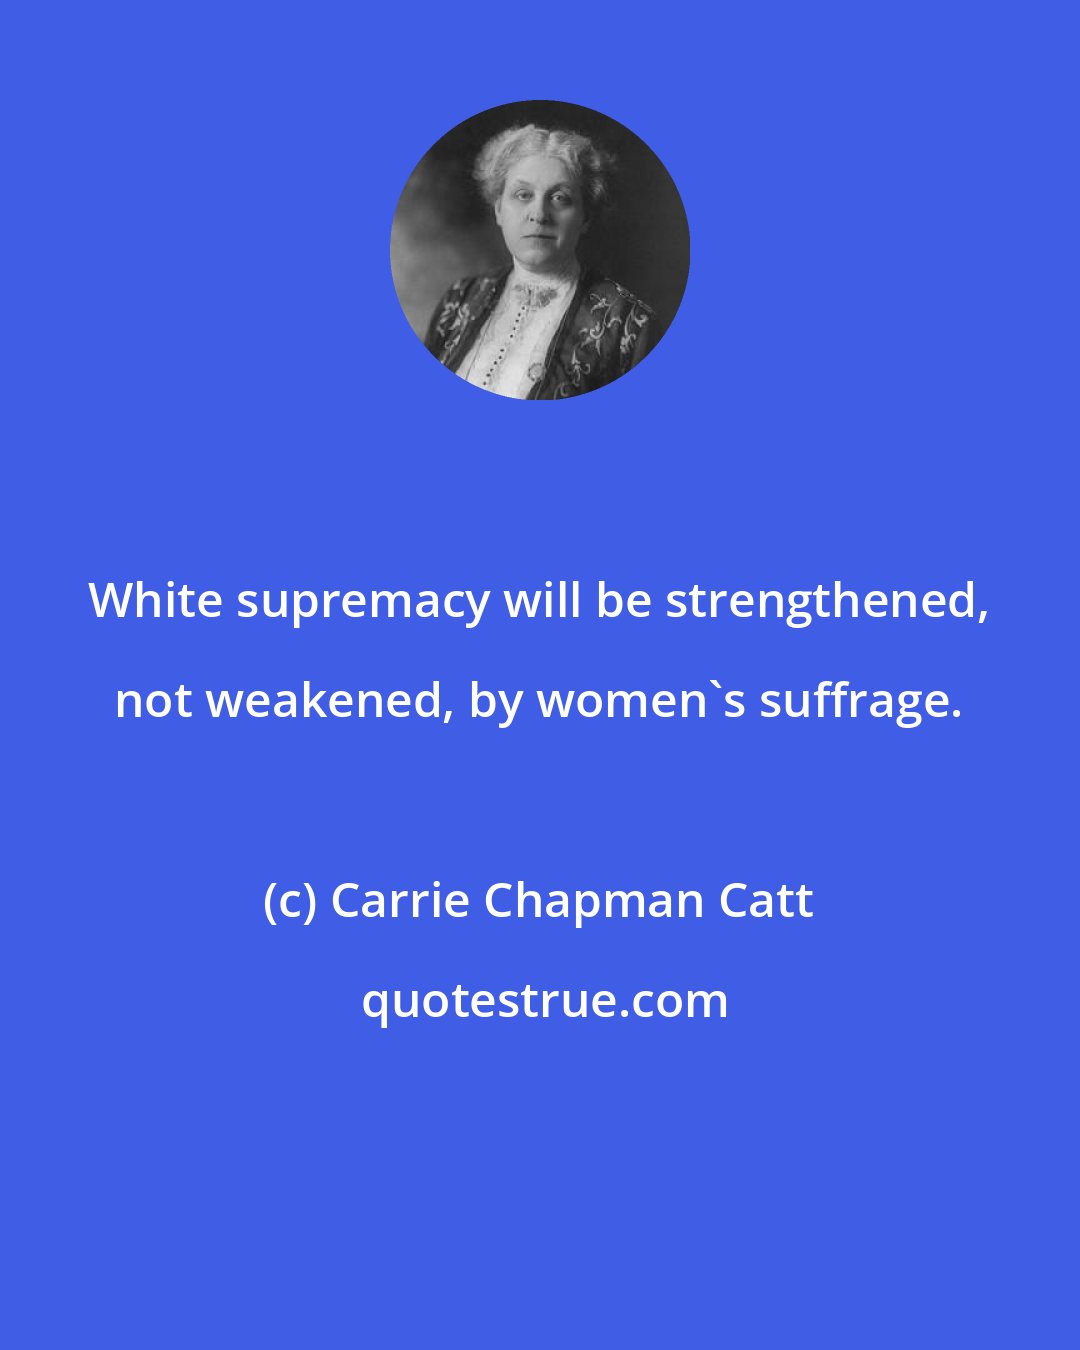 Carrie Chapman Catt: White supremacy will be strengthened, not weakened, by women's suffrage.